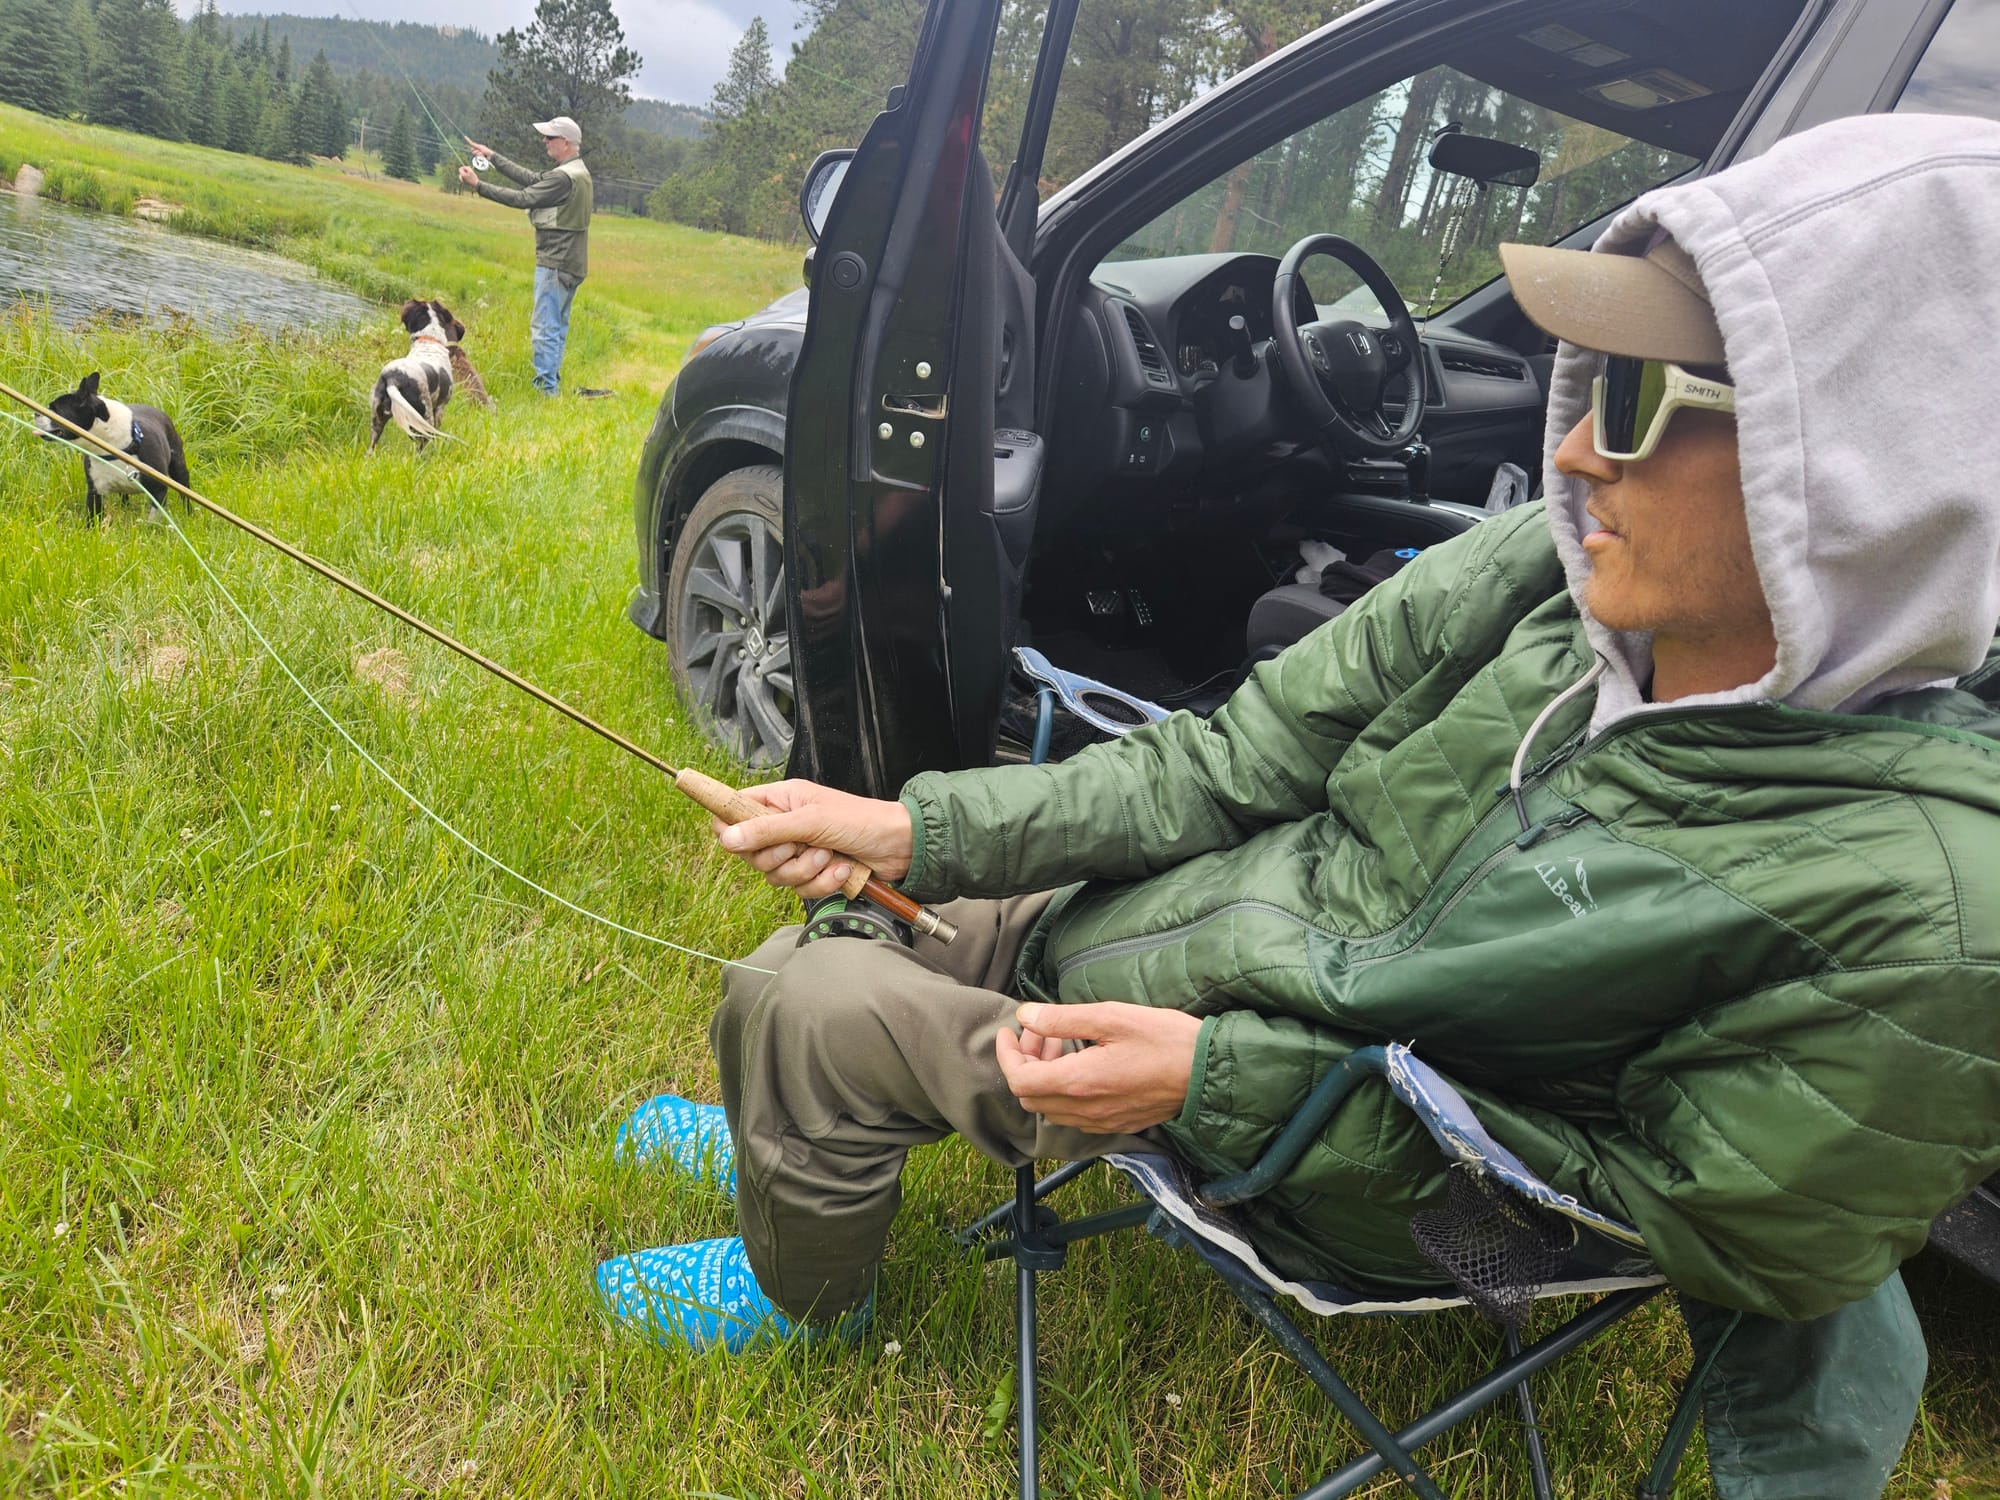 Taylor Nielsen and his dad, David Nielsen fly fish in the Black Hills. Two dogs are running in the foreground.